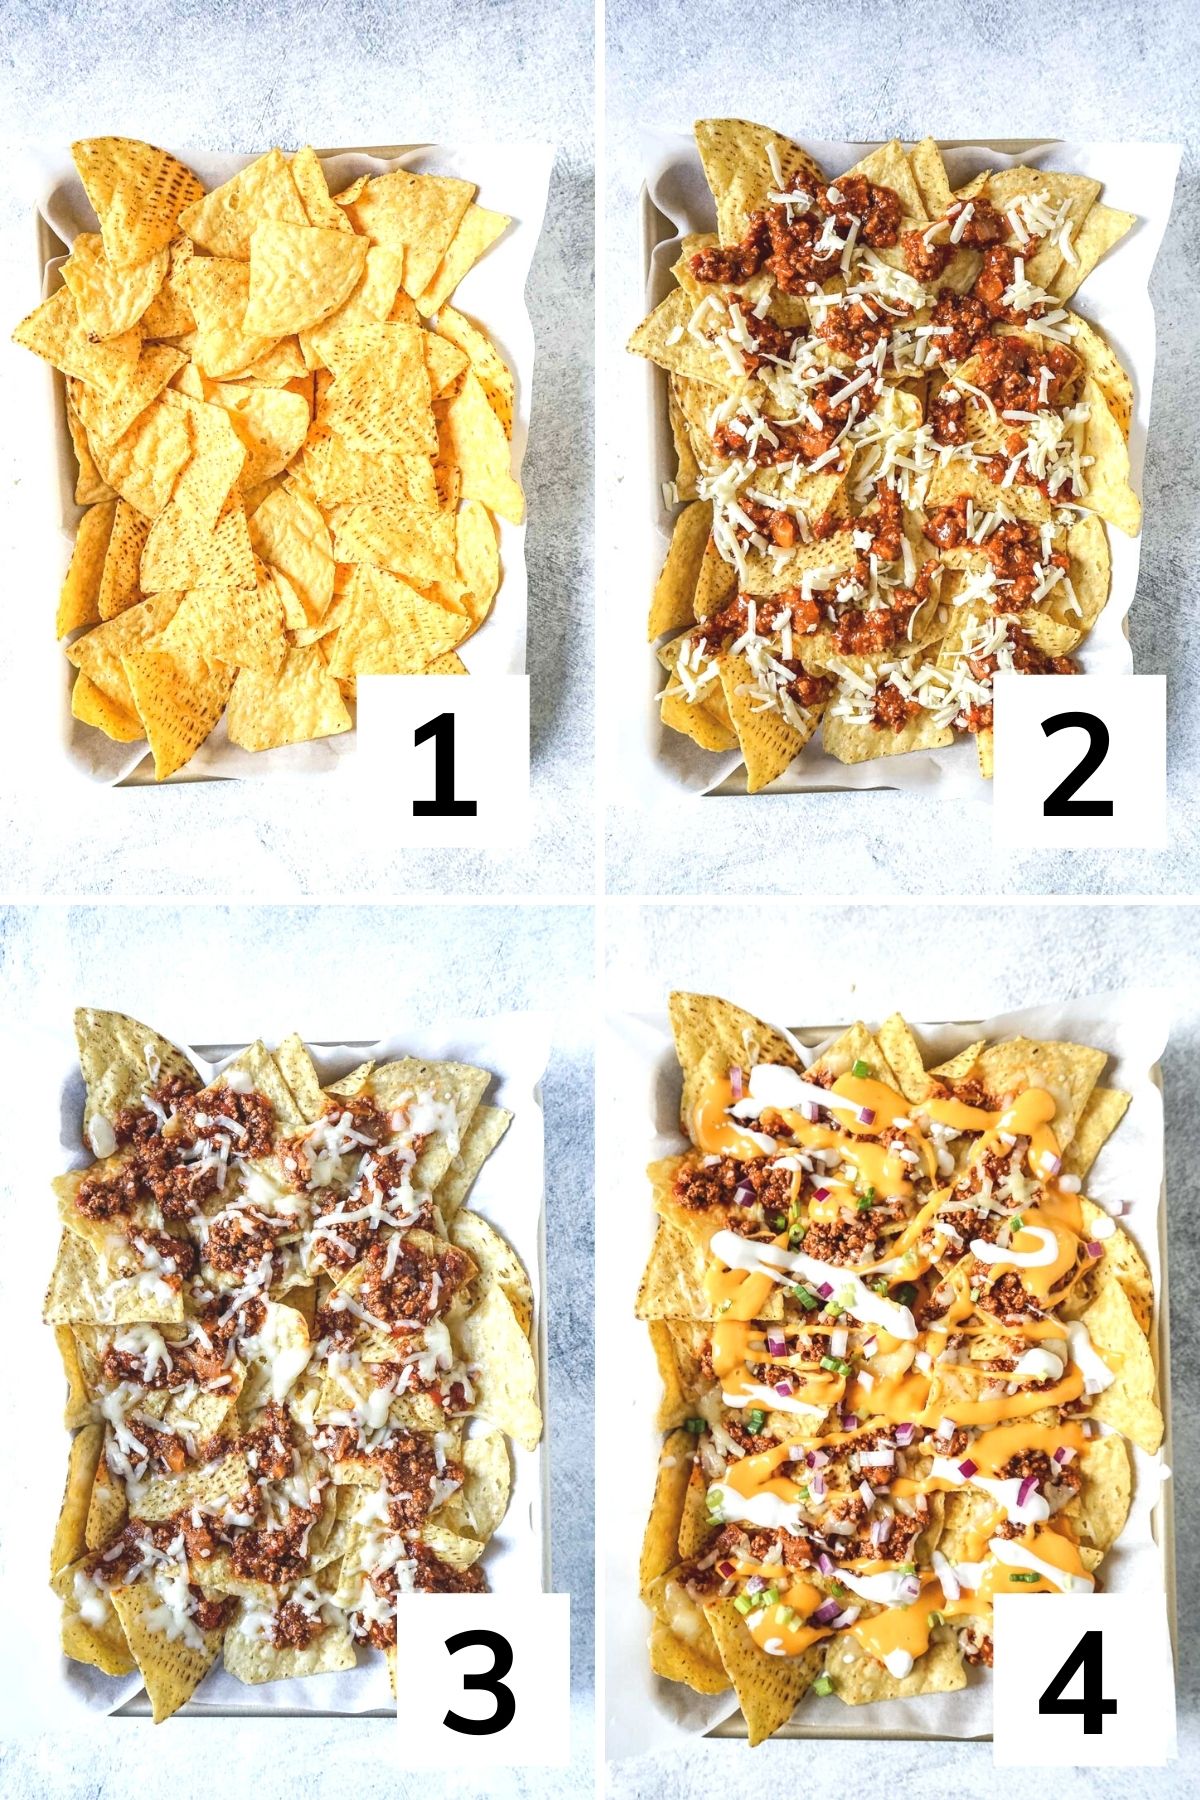 How to make chili con carne nachos step by step.